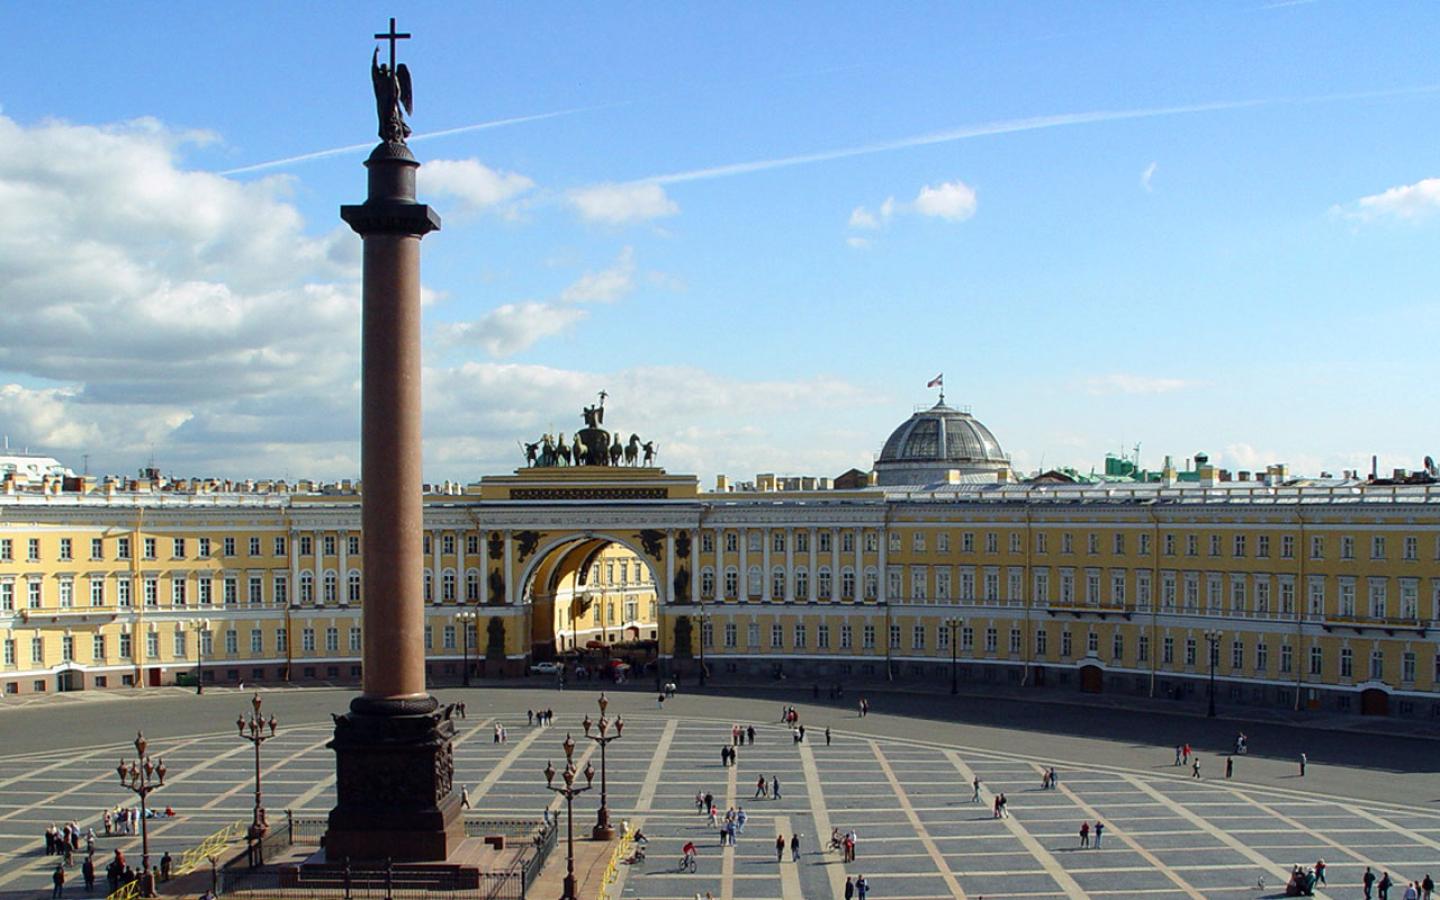 St Petersburg - Palace Square Wallpaper #4 1440 x 900 